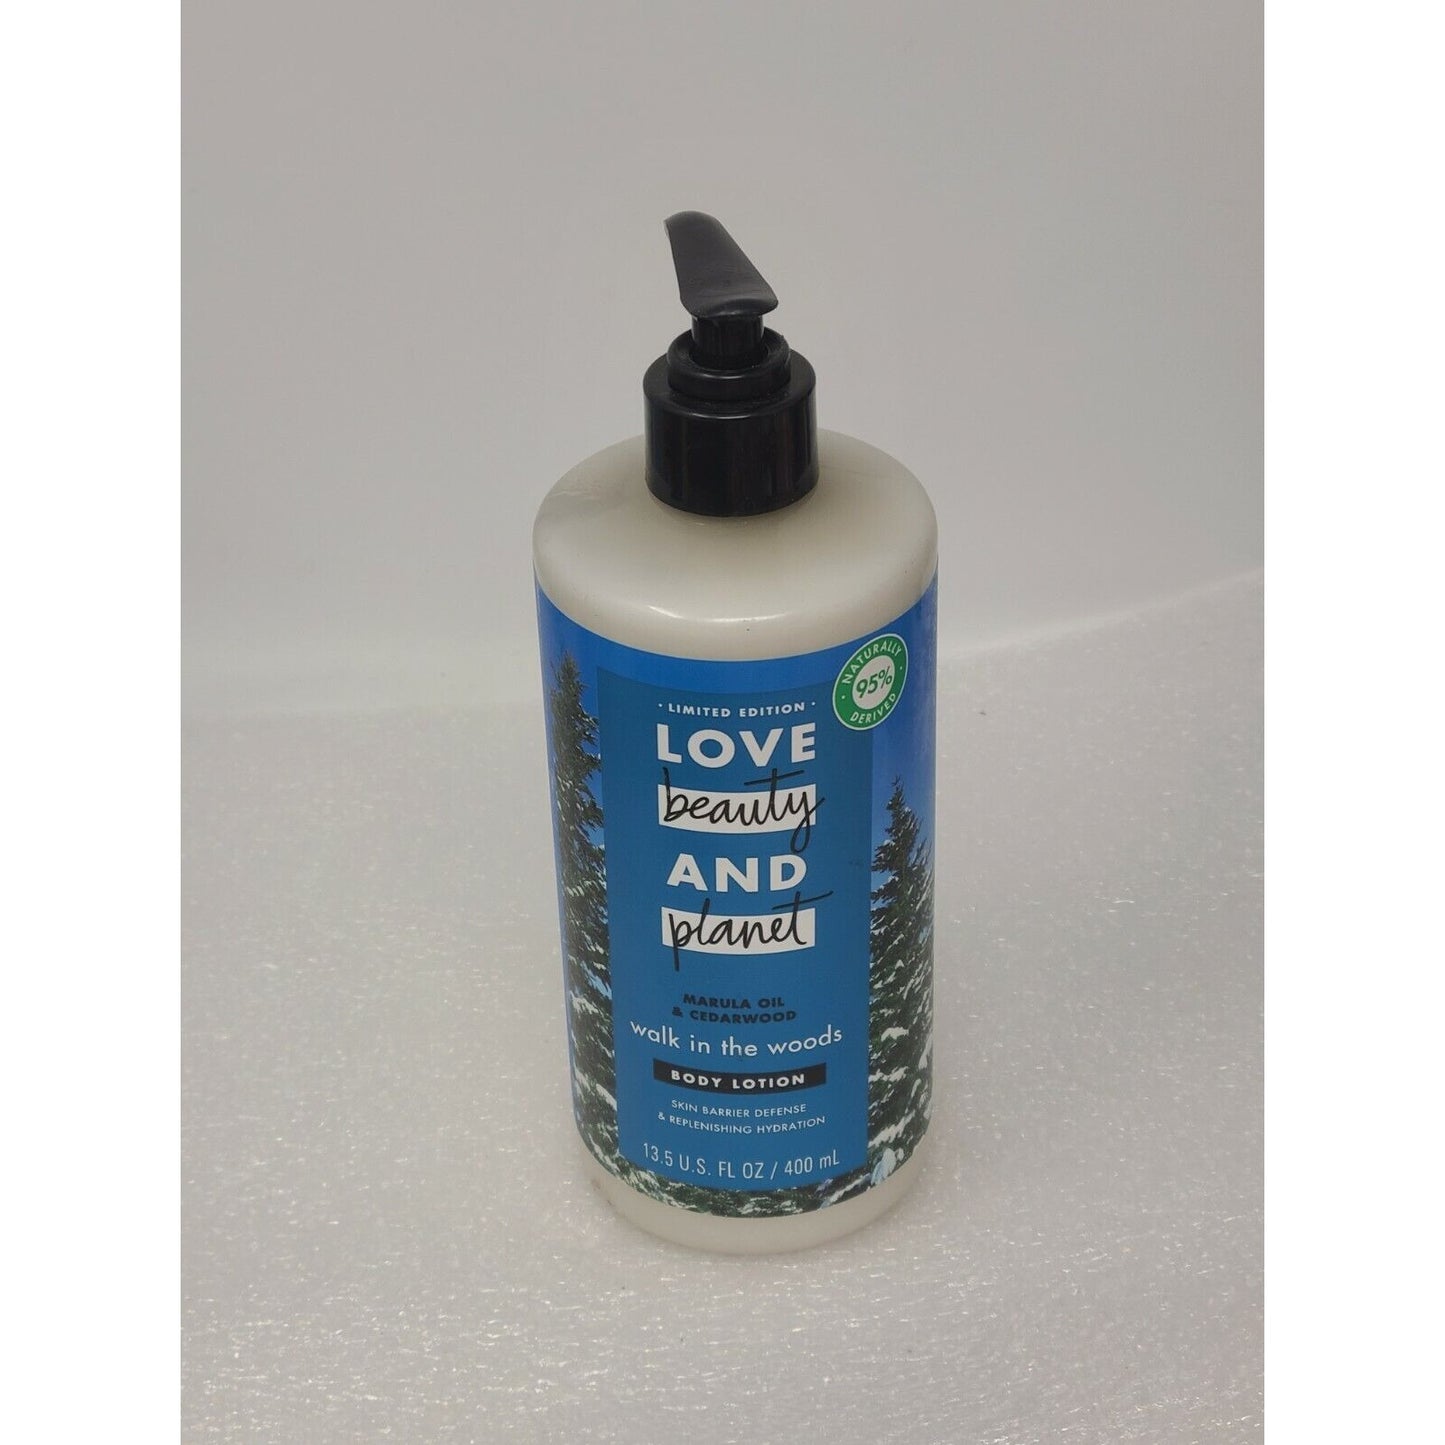 Love Beauty and Planet Limited Edition Walk in the Woods Body Lotion 13.5 oz